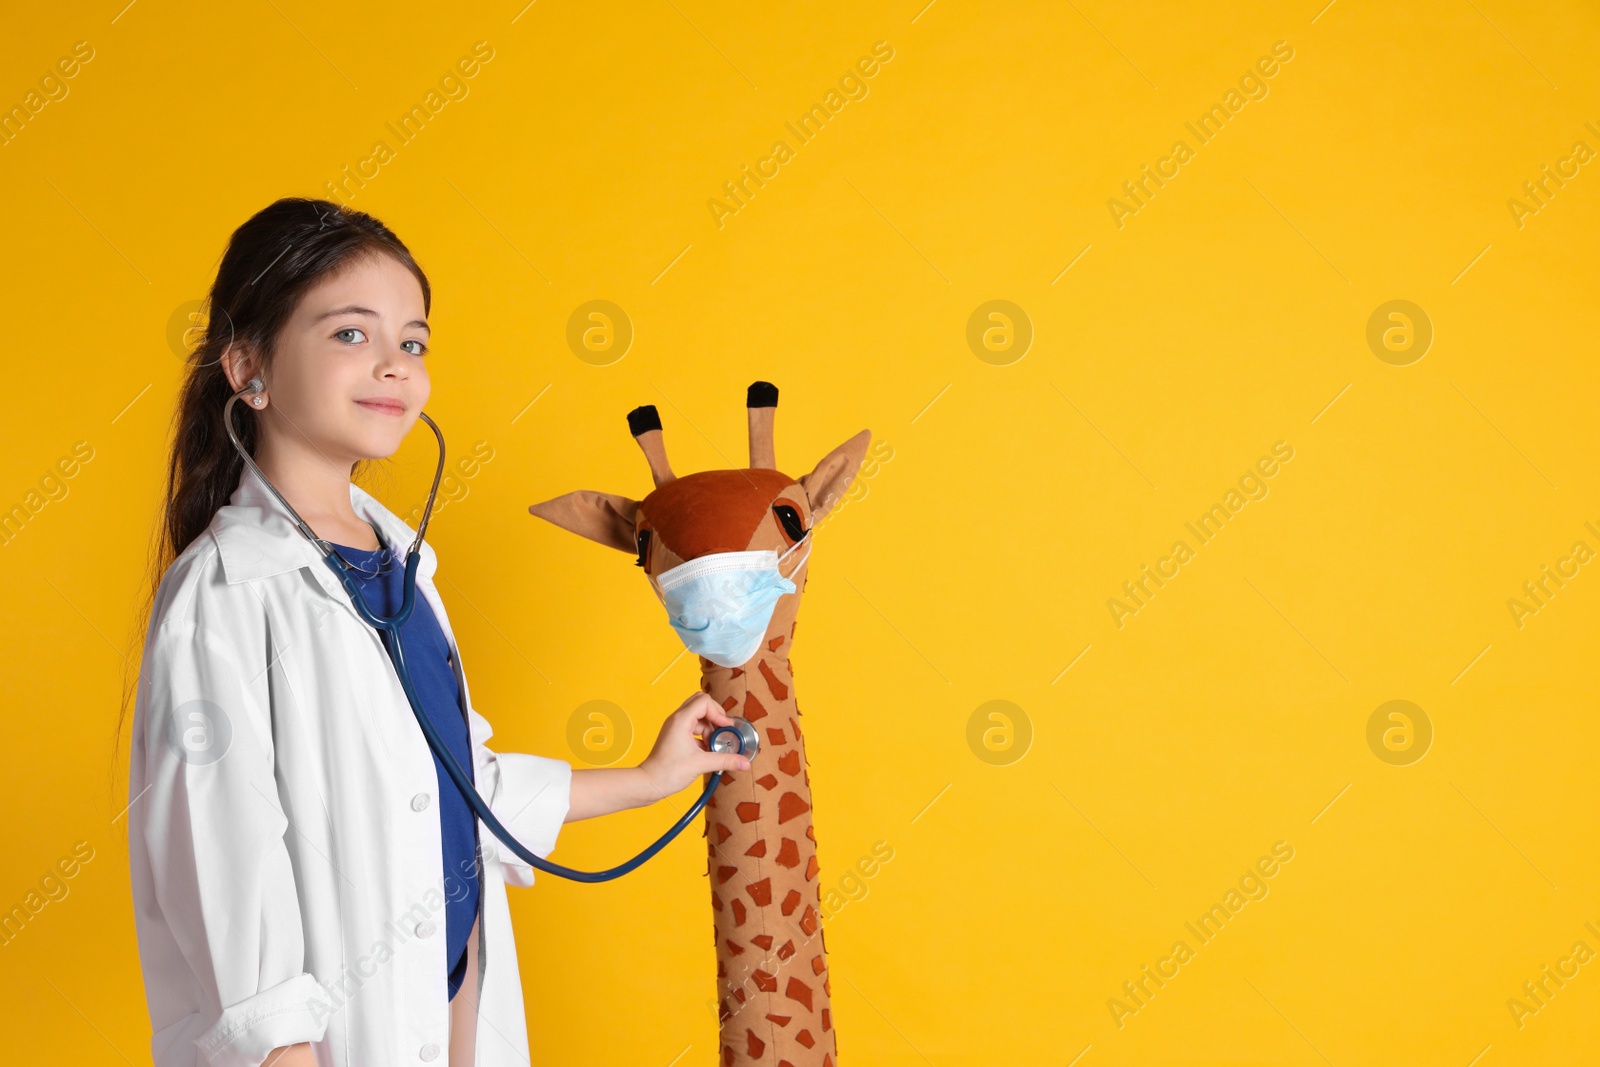 Photo of Little girl playing doctor with toy giraffe on yellow background, space for text. Pediatrician practice